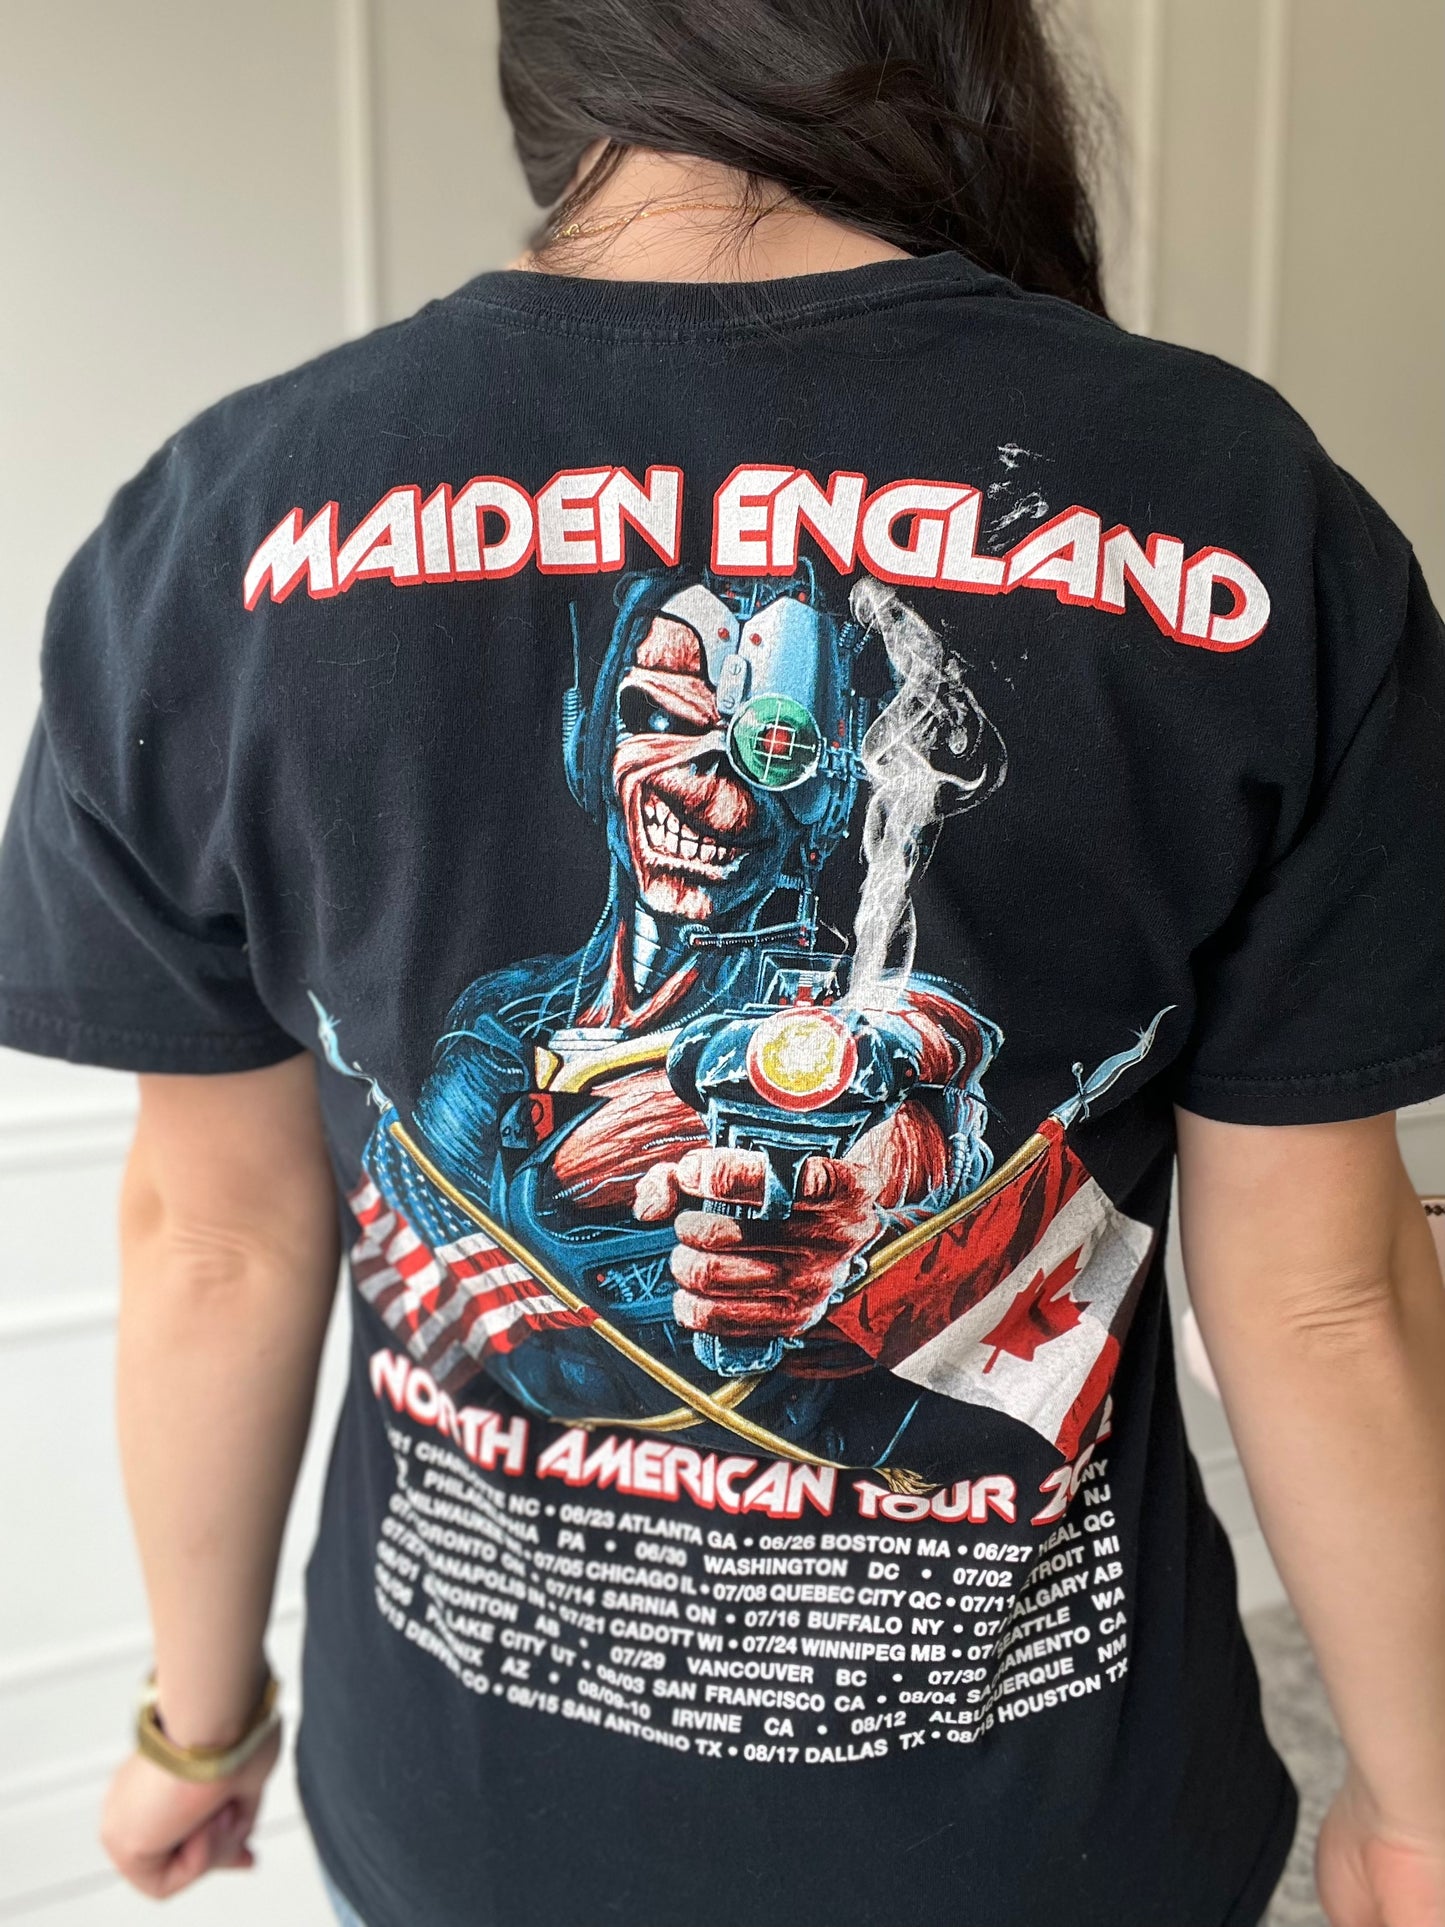 Iron Maiden 2012 Concert Tee - Size Mens L